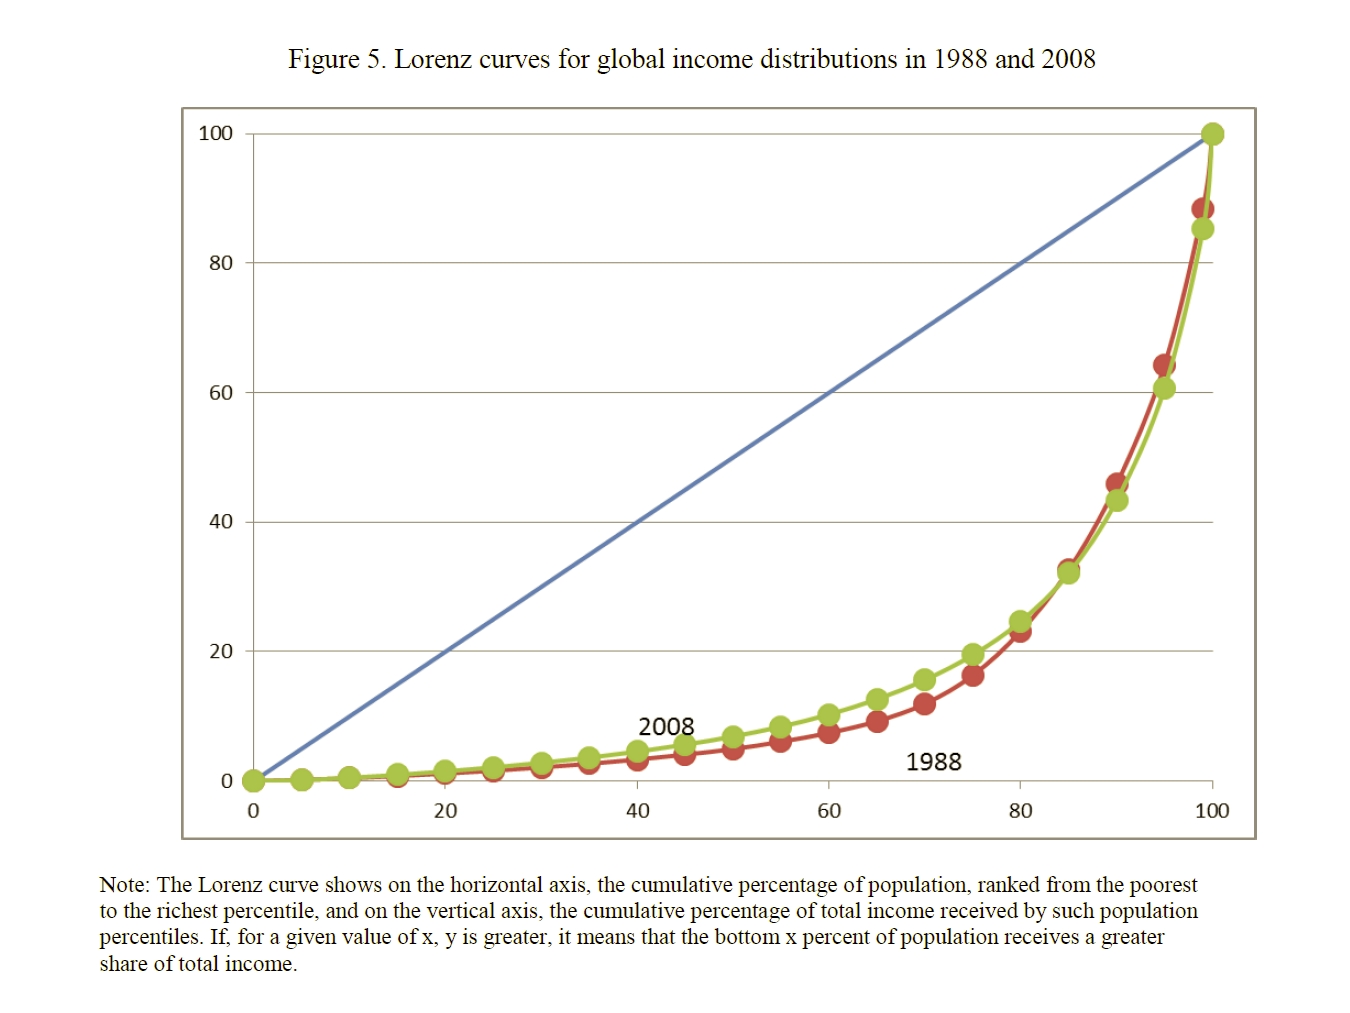 Enlarged view: Figure 5. Lorenz Curves for Global Income Distribution in 1988 and 2008